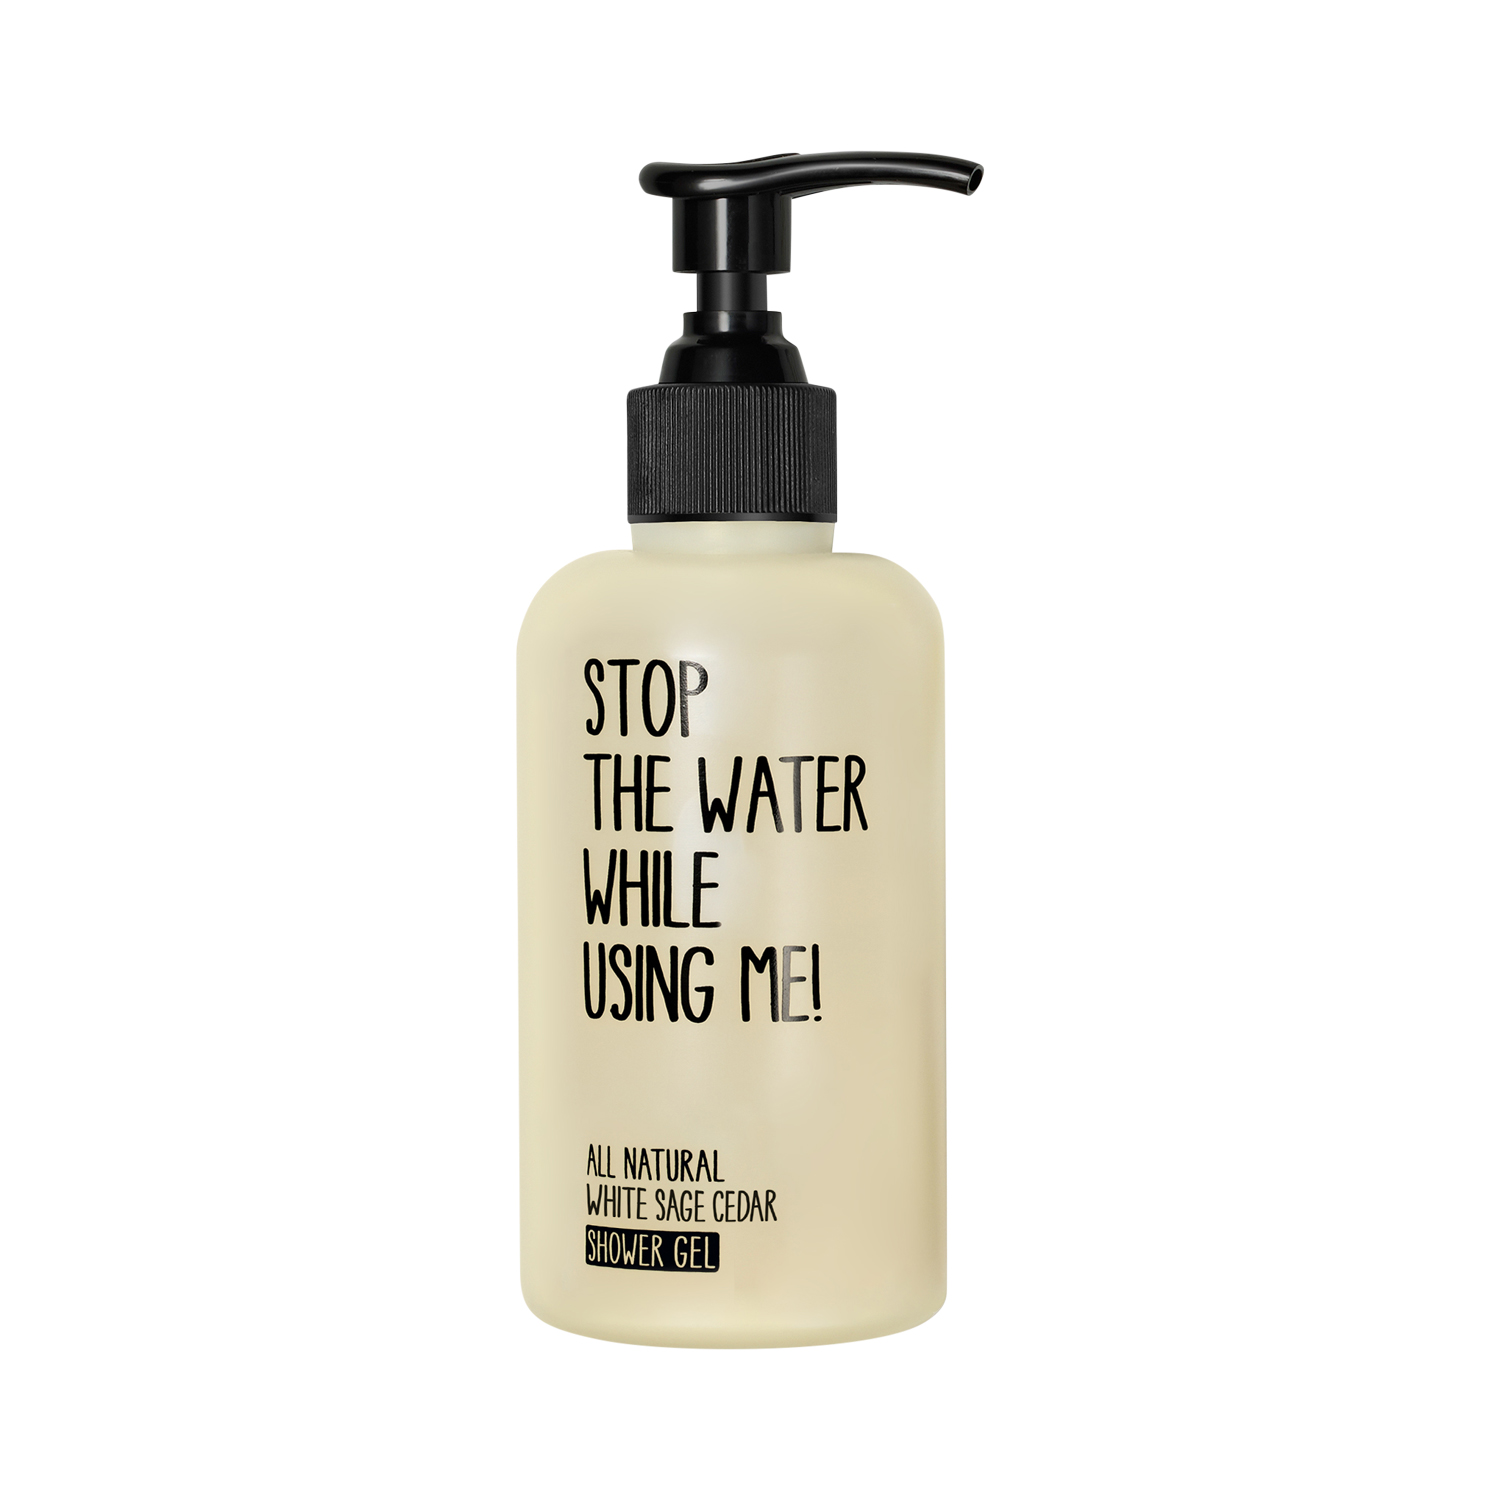 Stop The Water While Using Me! - All Natural White Sage Cedar Shower Gel - Duschgel